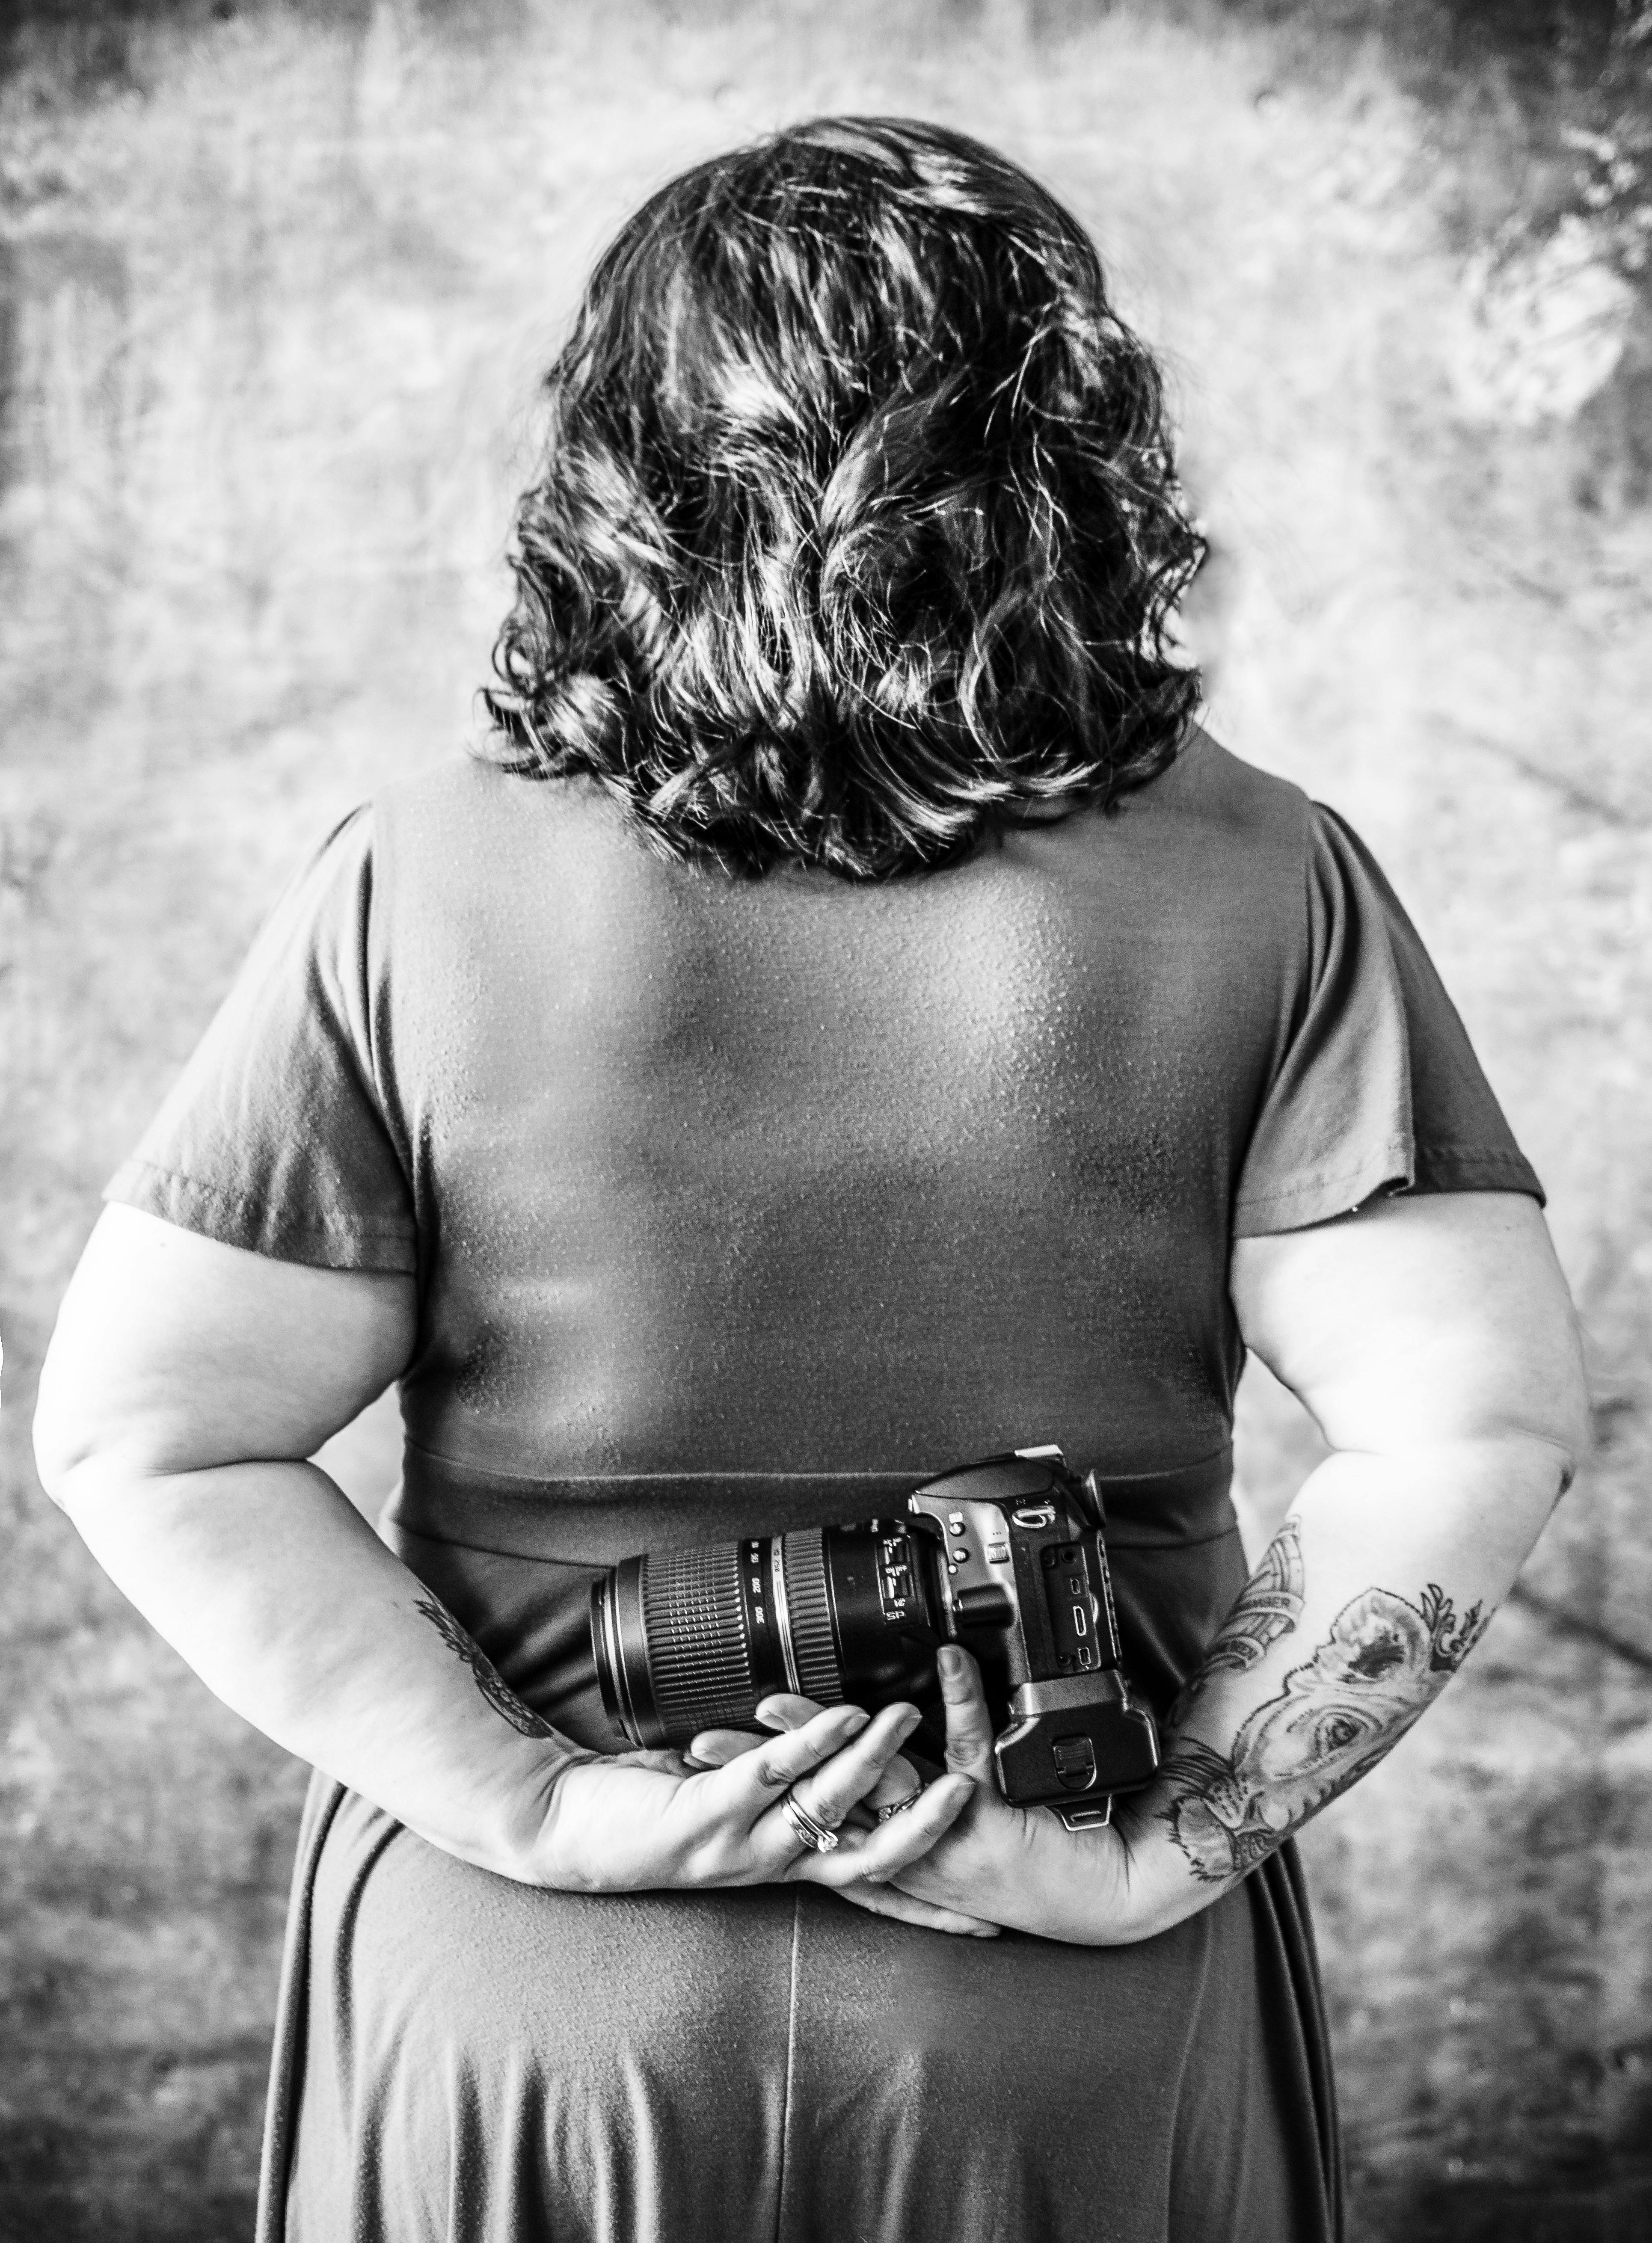 Free stock photo of black and white, from the back, portrait with camera